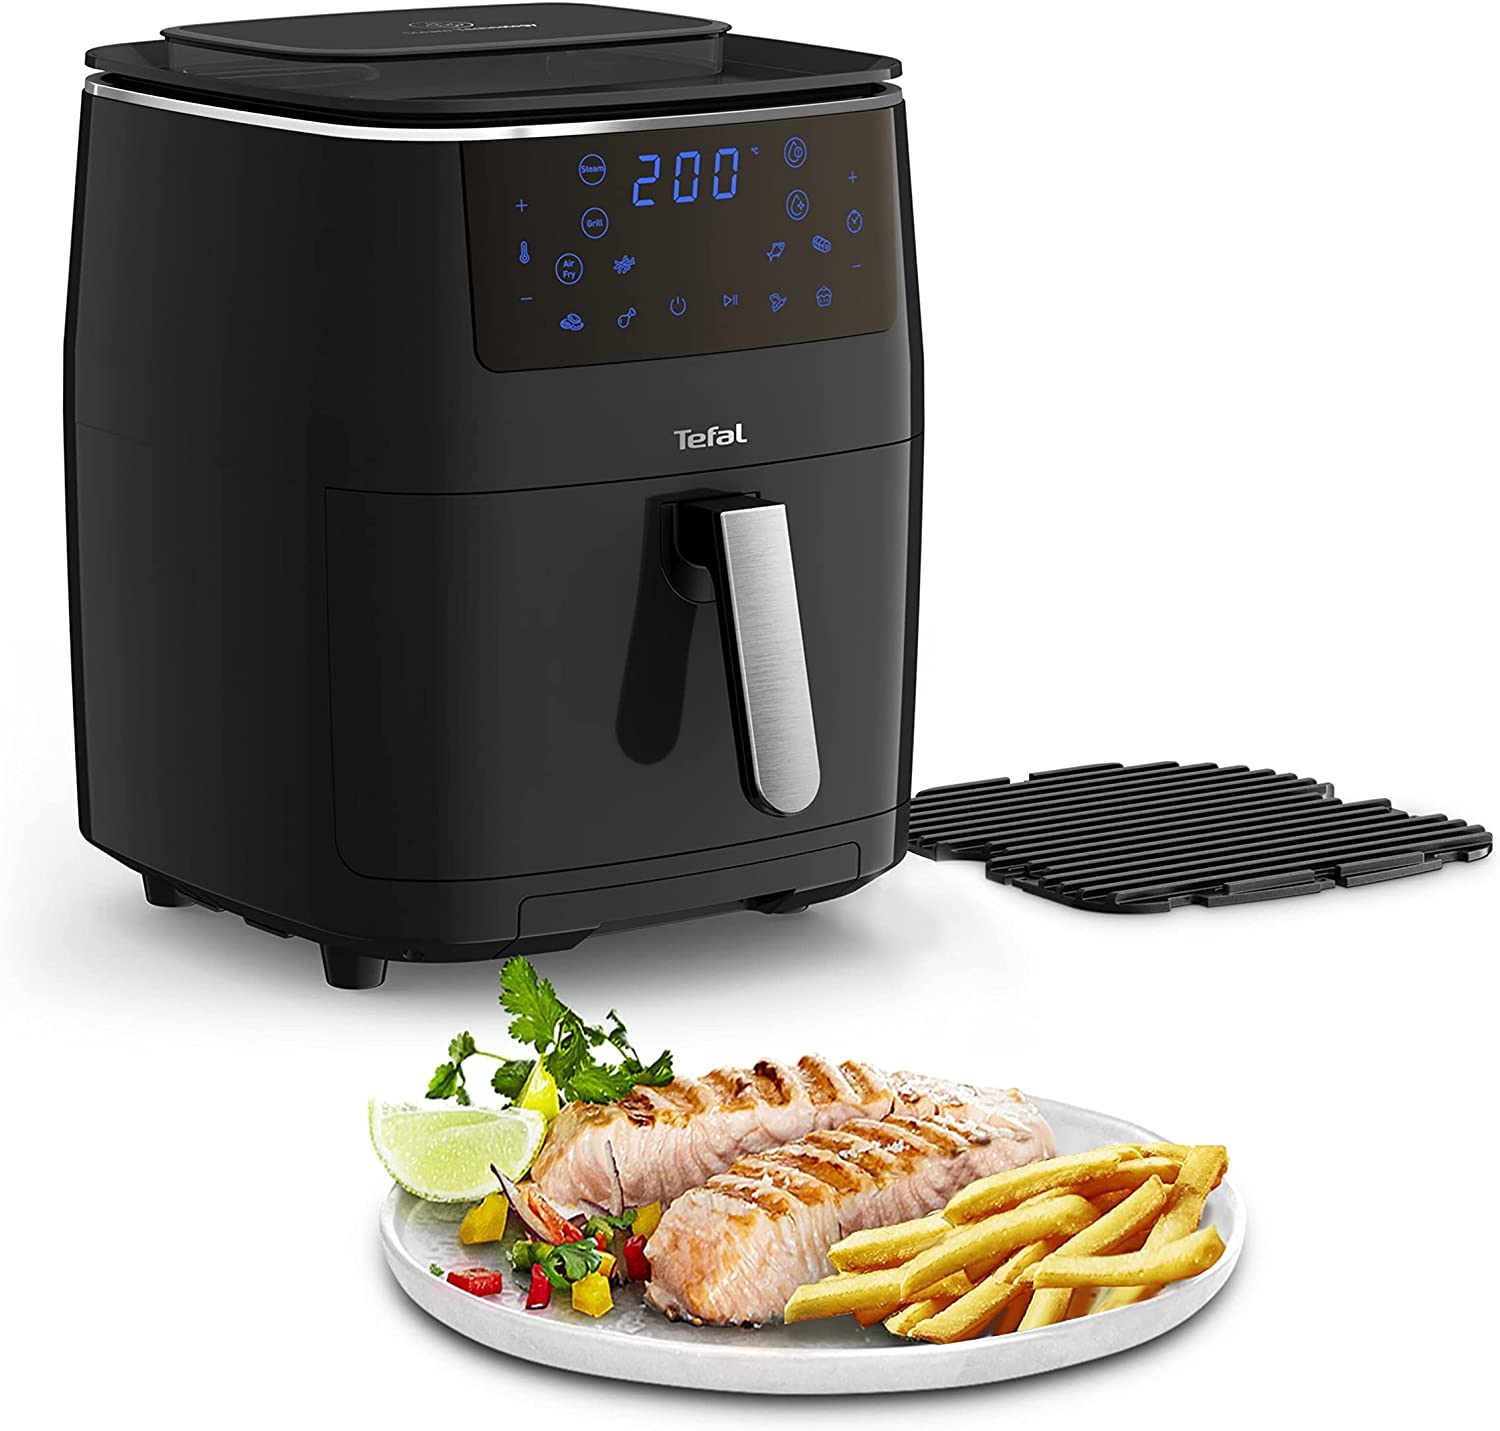 Tefal FW2018 Easy Fry Grill & Steam Hot Air Fryer | 3-in-1 (Hot Air Fryer, Grill and Steamer) | 7 Automatic Programmes | Capacity: 6.5 Litres | Timer | Black